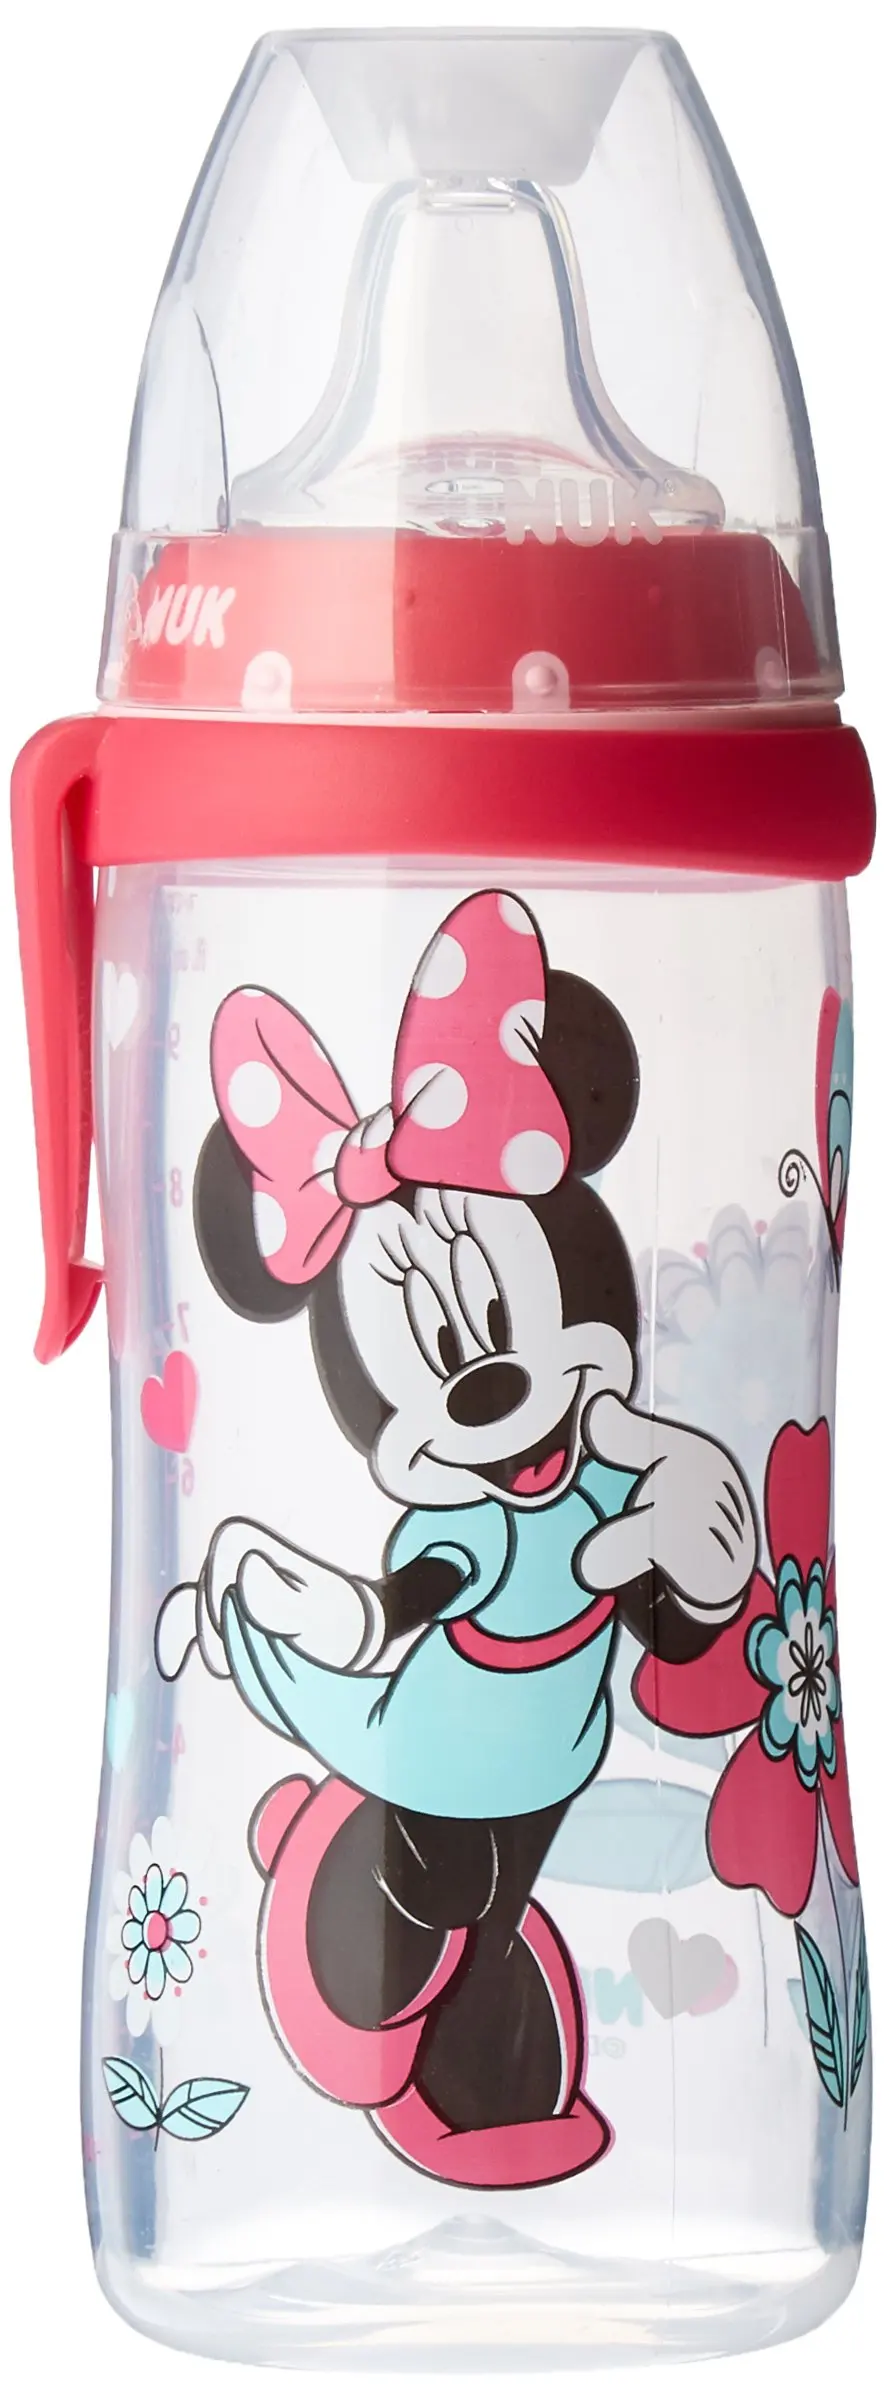 nuk mickey mouse sippy cup